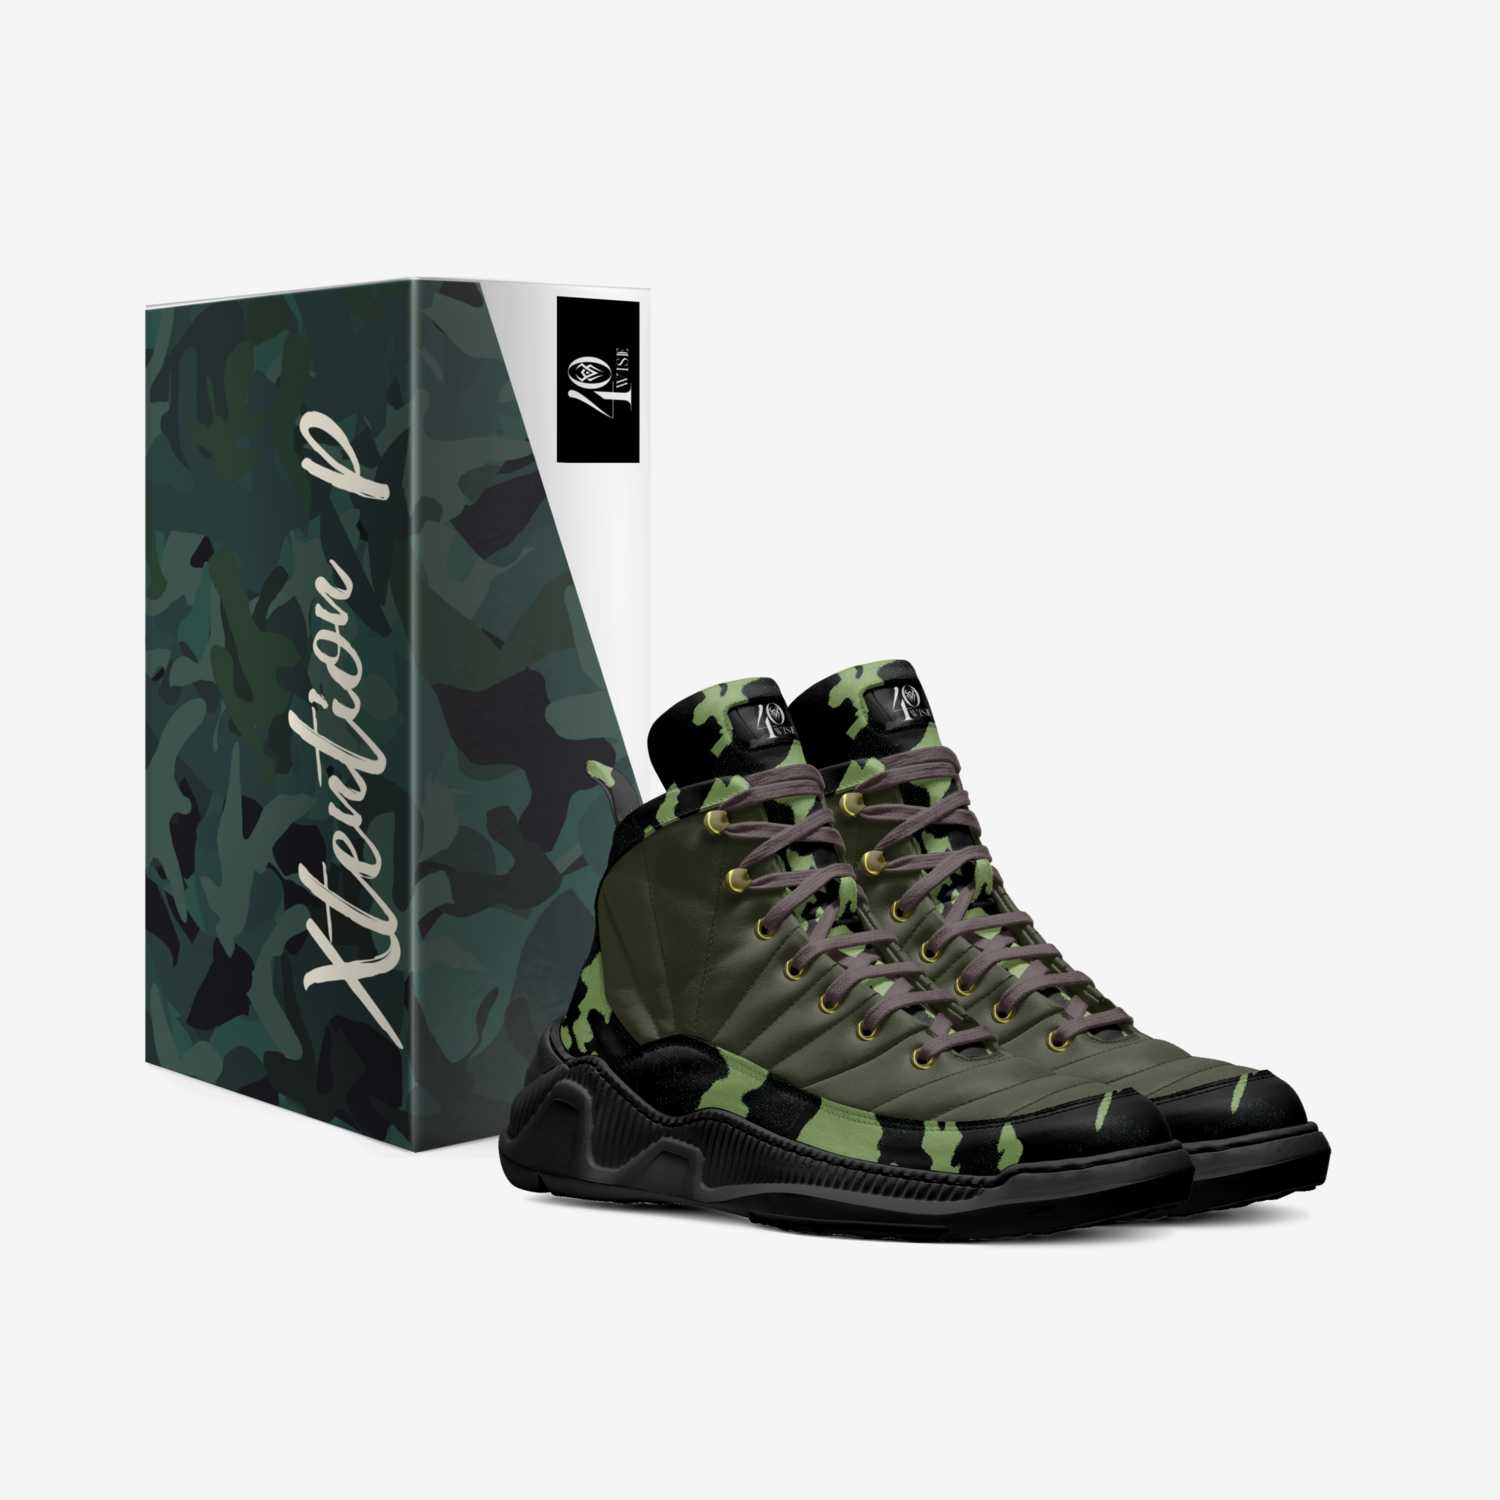 Xtention P custom made in Italy shoes by Patrick Ashitei | Box view